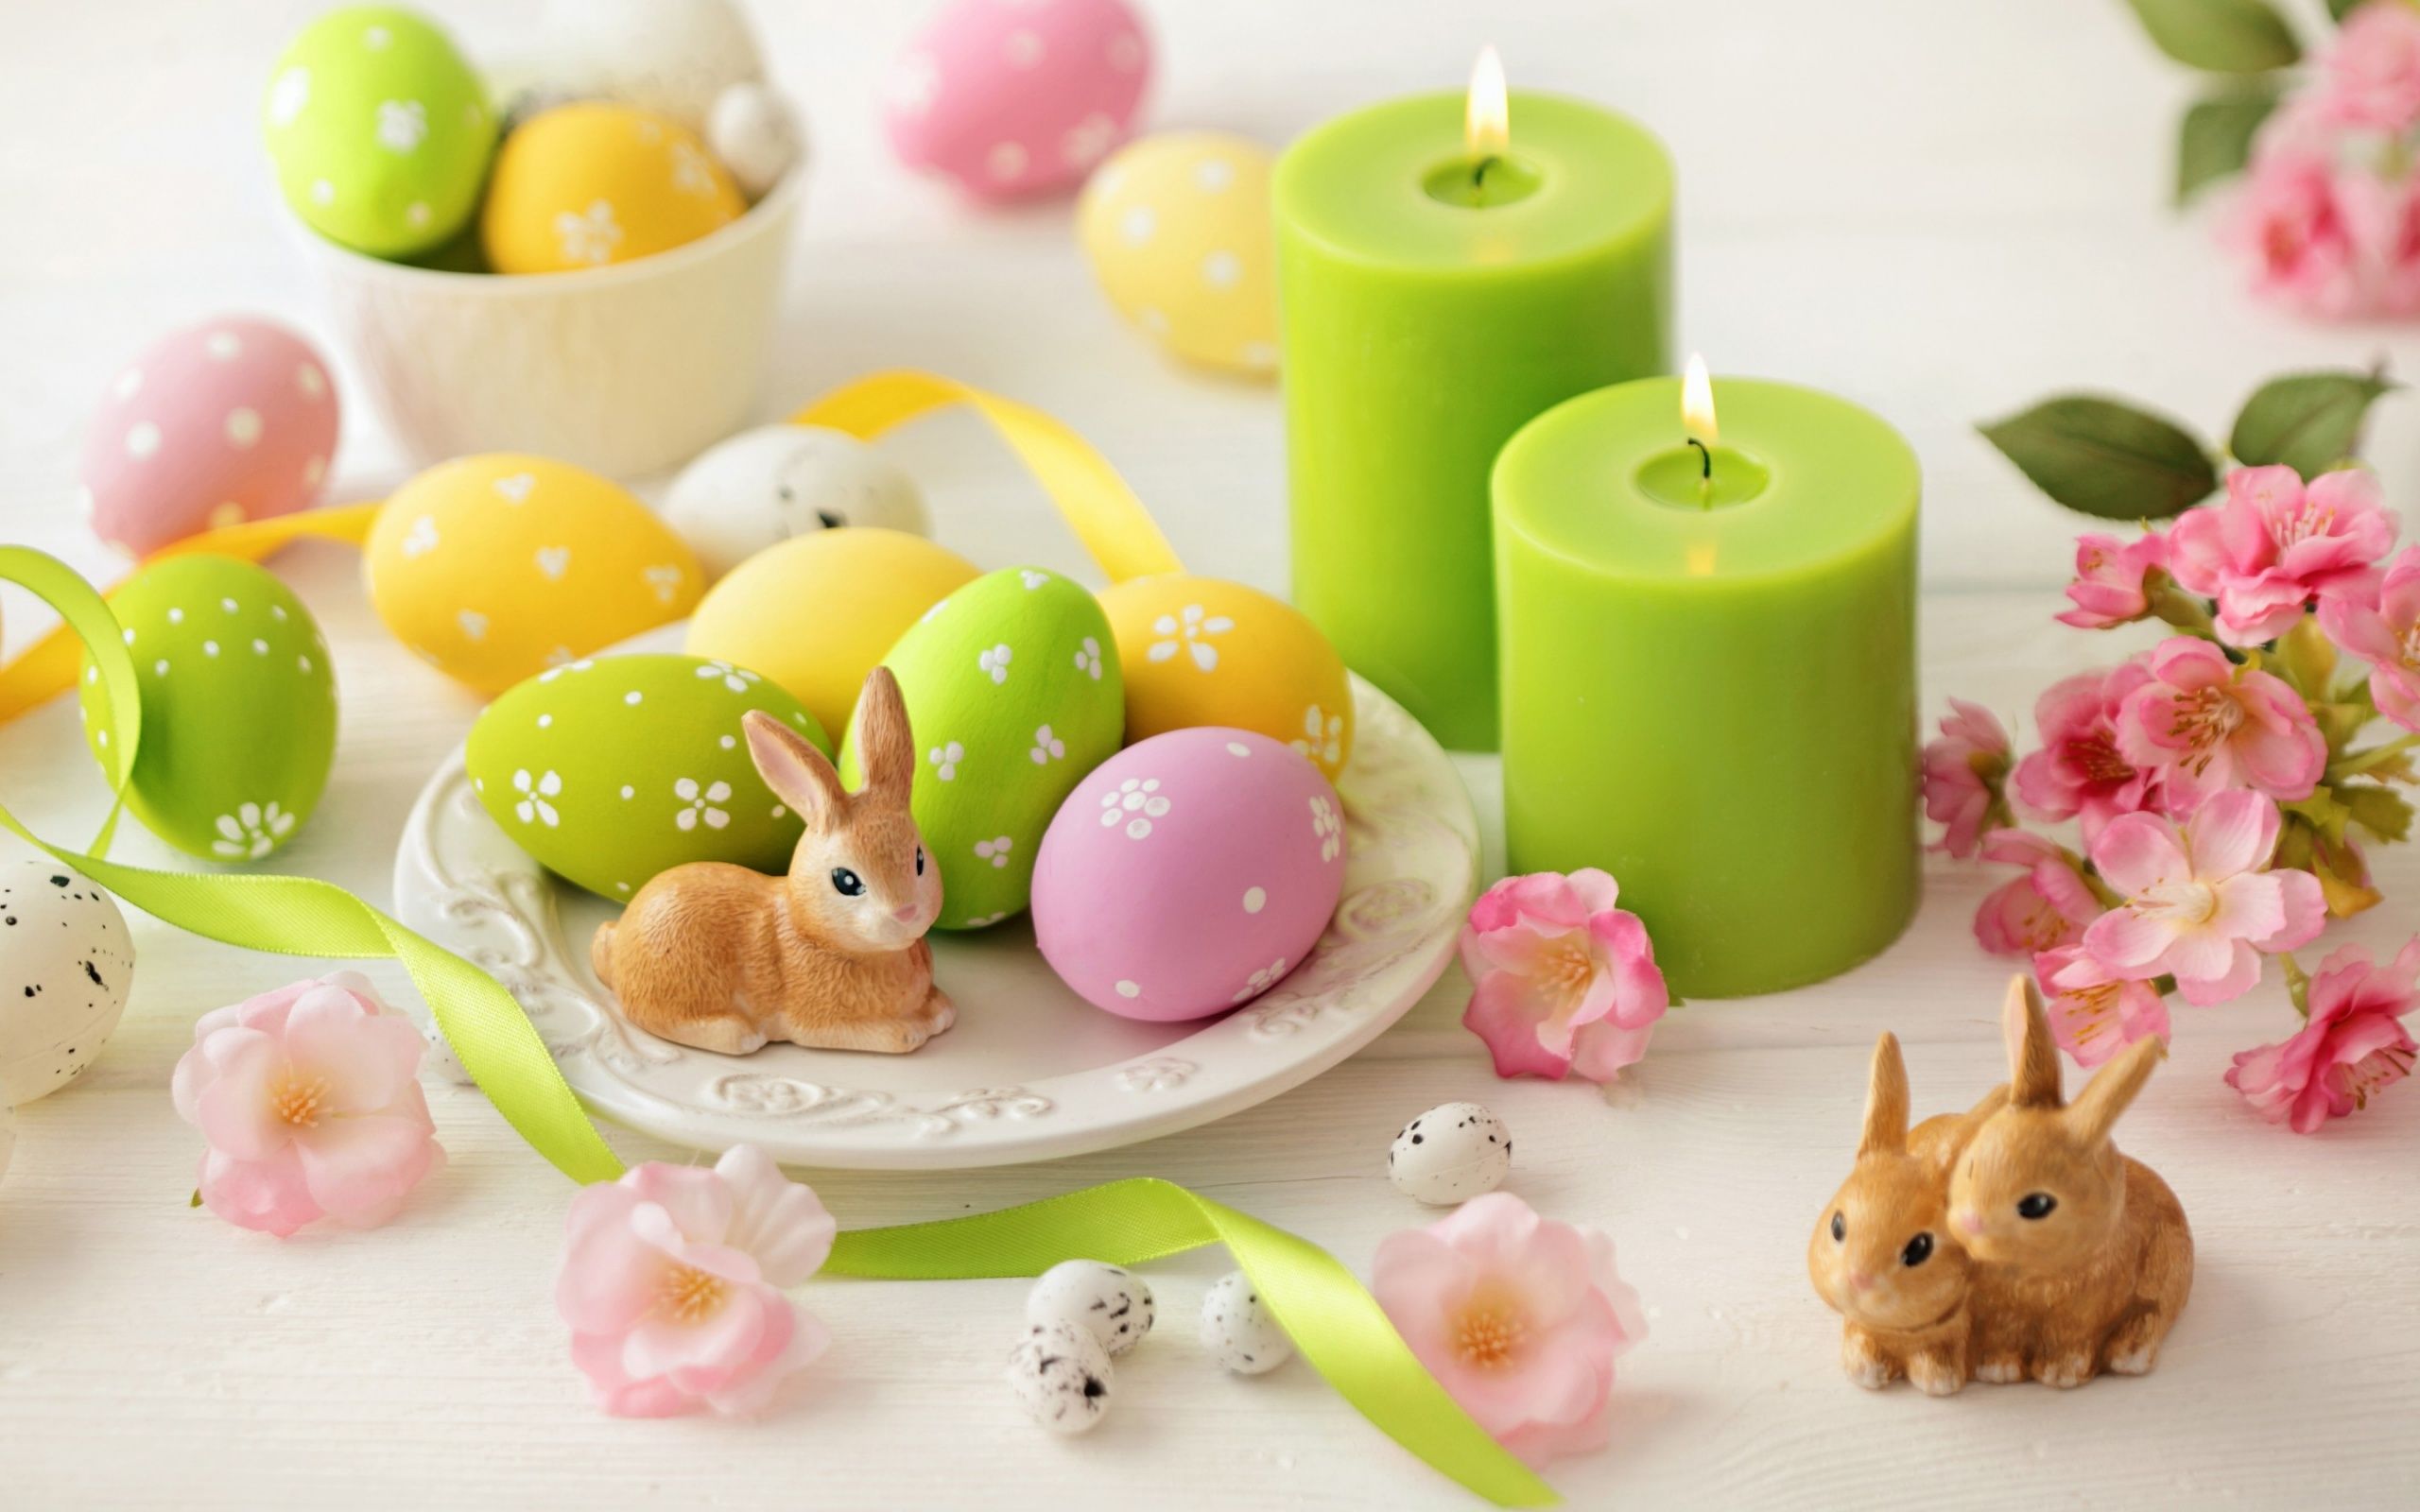 Download wallpaper Painted Easter eggs, green candles, easter, spring, easter background, rabbits for desktop with resolution 2560x1600. High Quality HD picture wallpaper